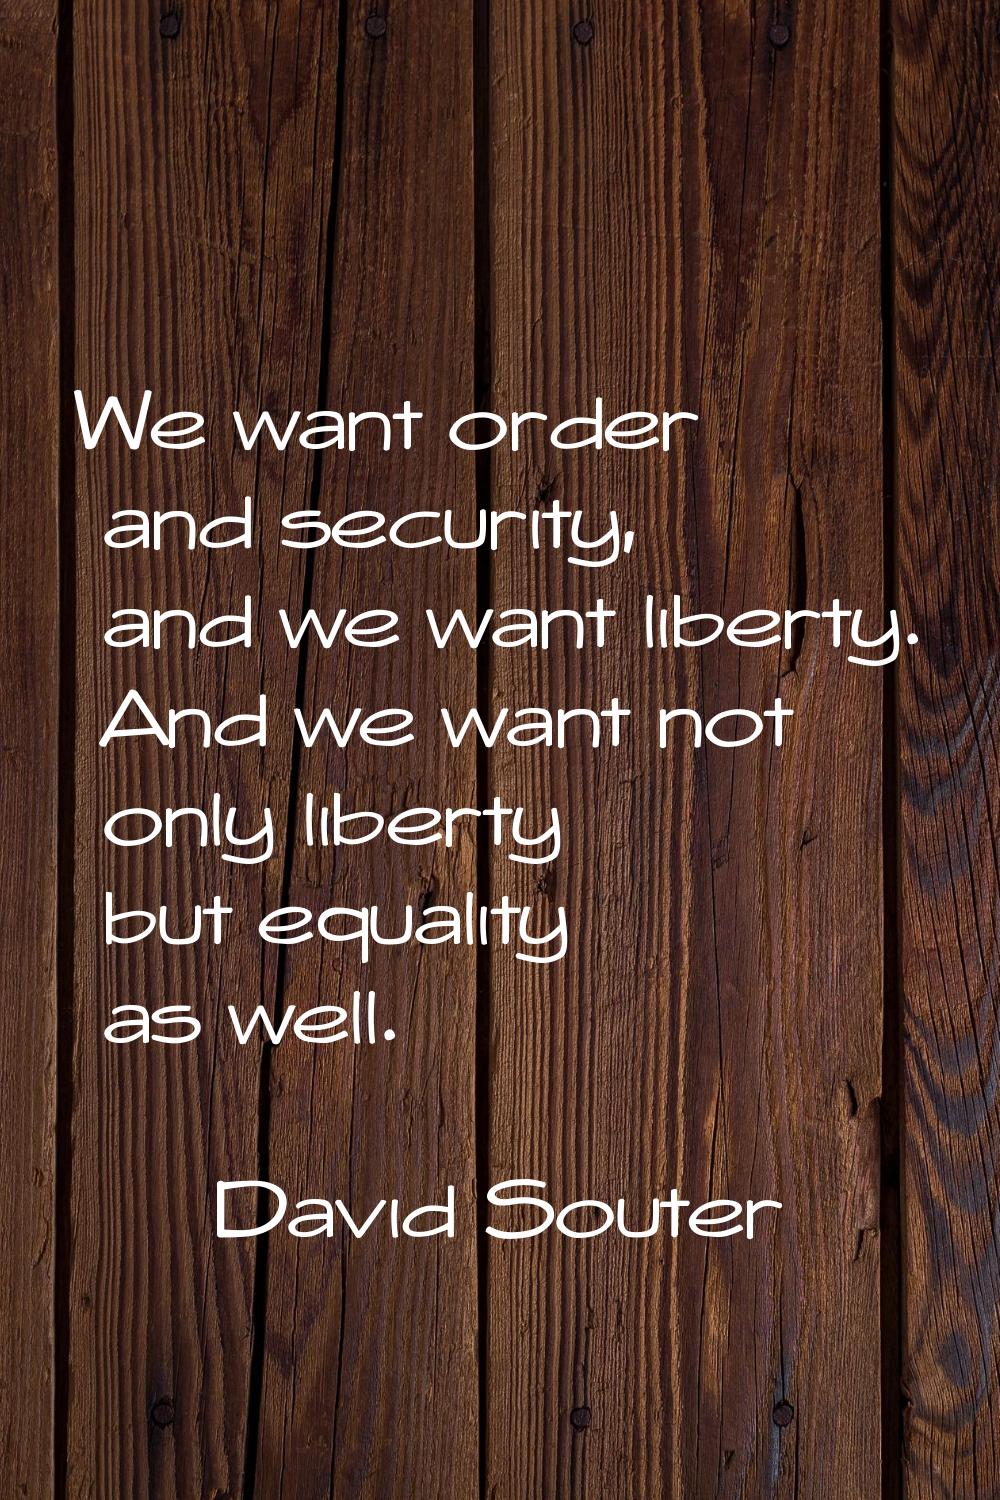 We want order and security, and we want liberty. And we want not only liberty but equality as well.